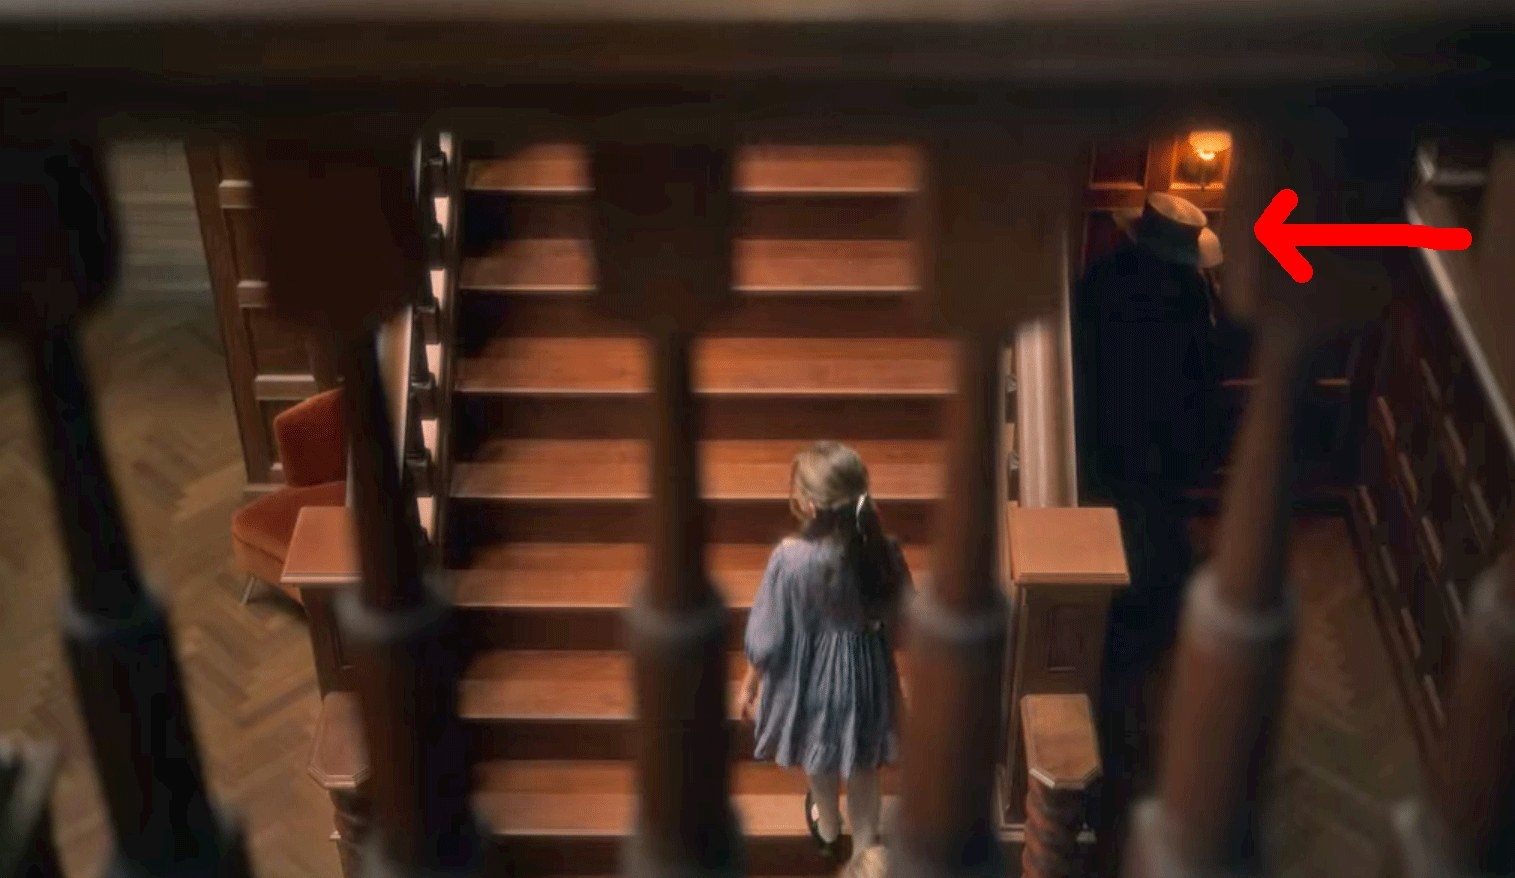 Flora walks up the stairs; a red arrow points to a figure in a hat lurking in the corner below the stairs